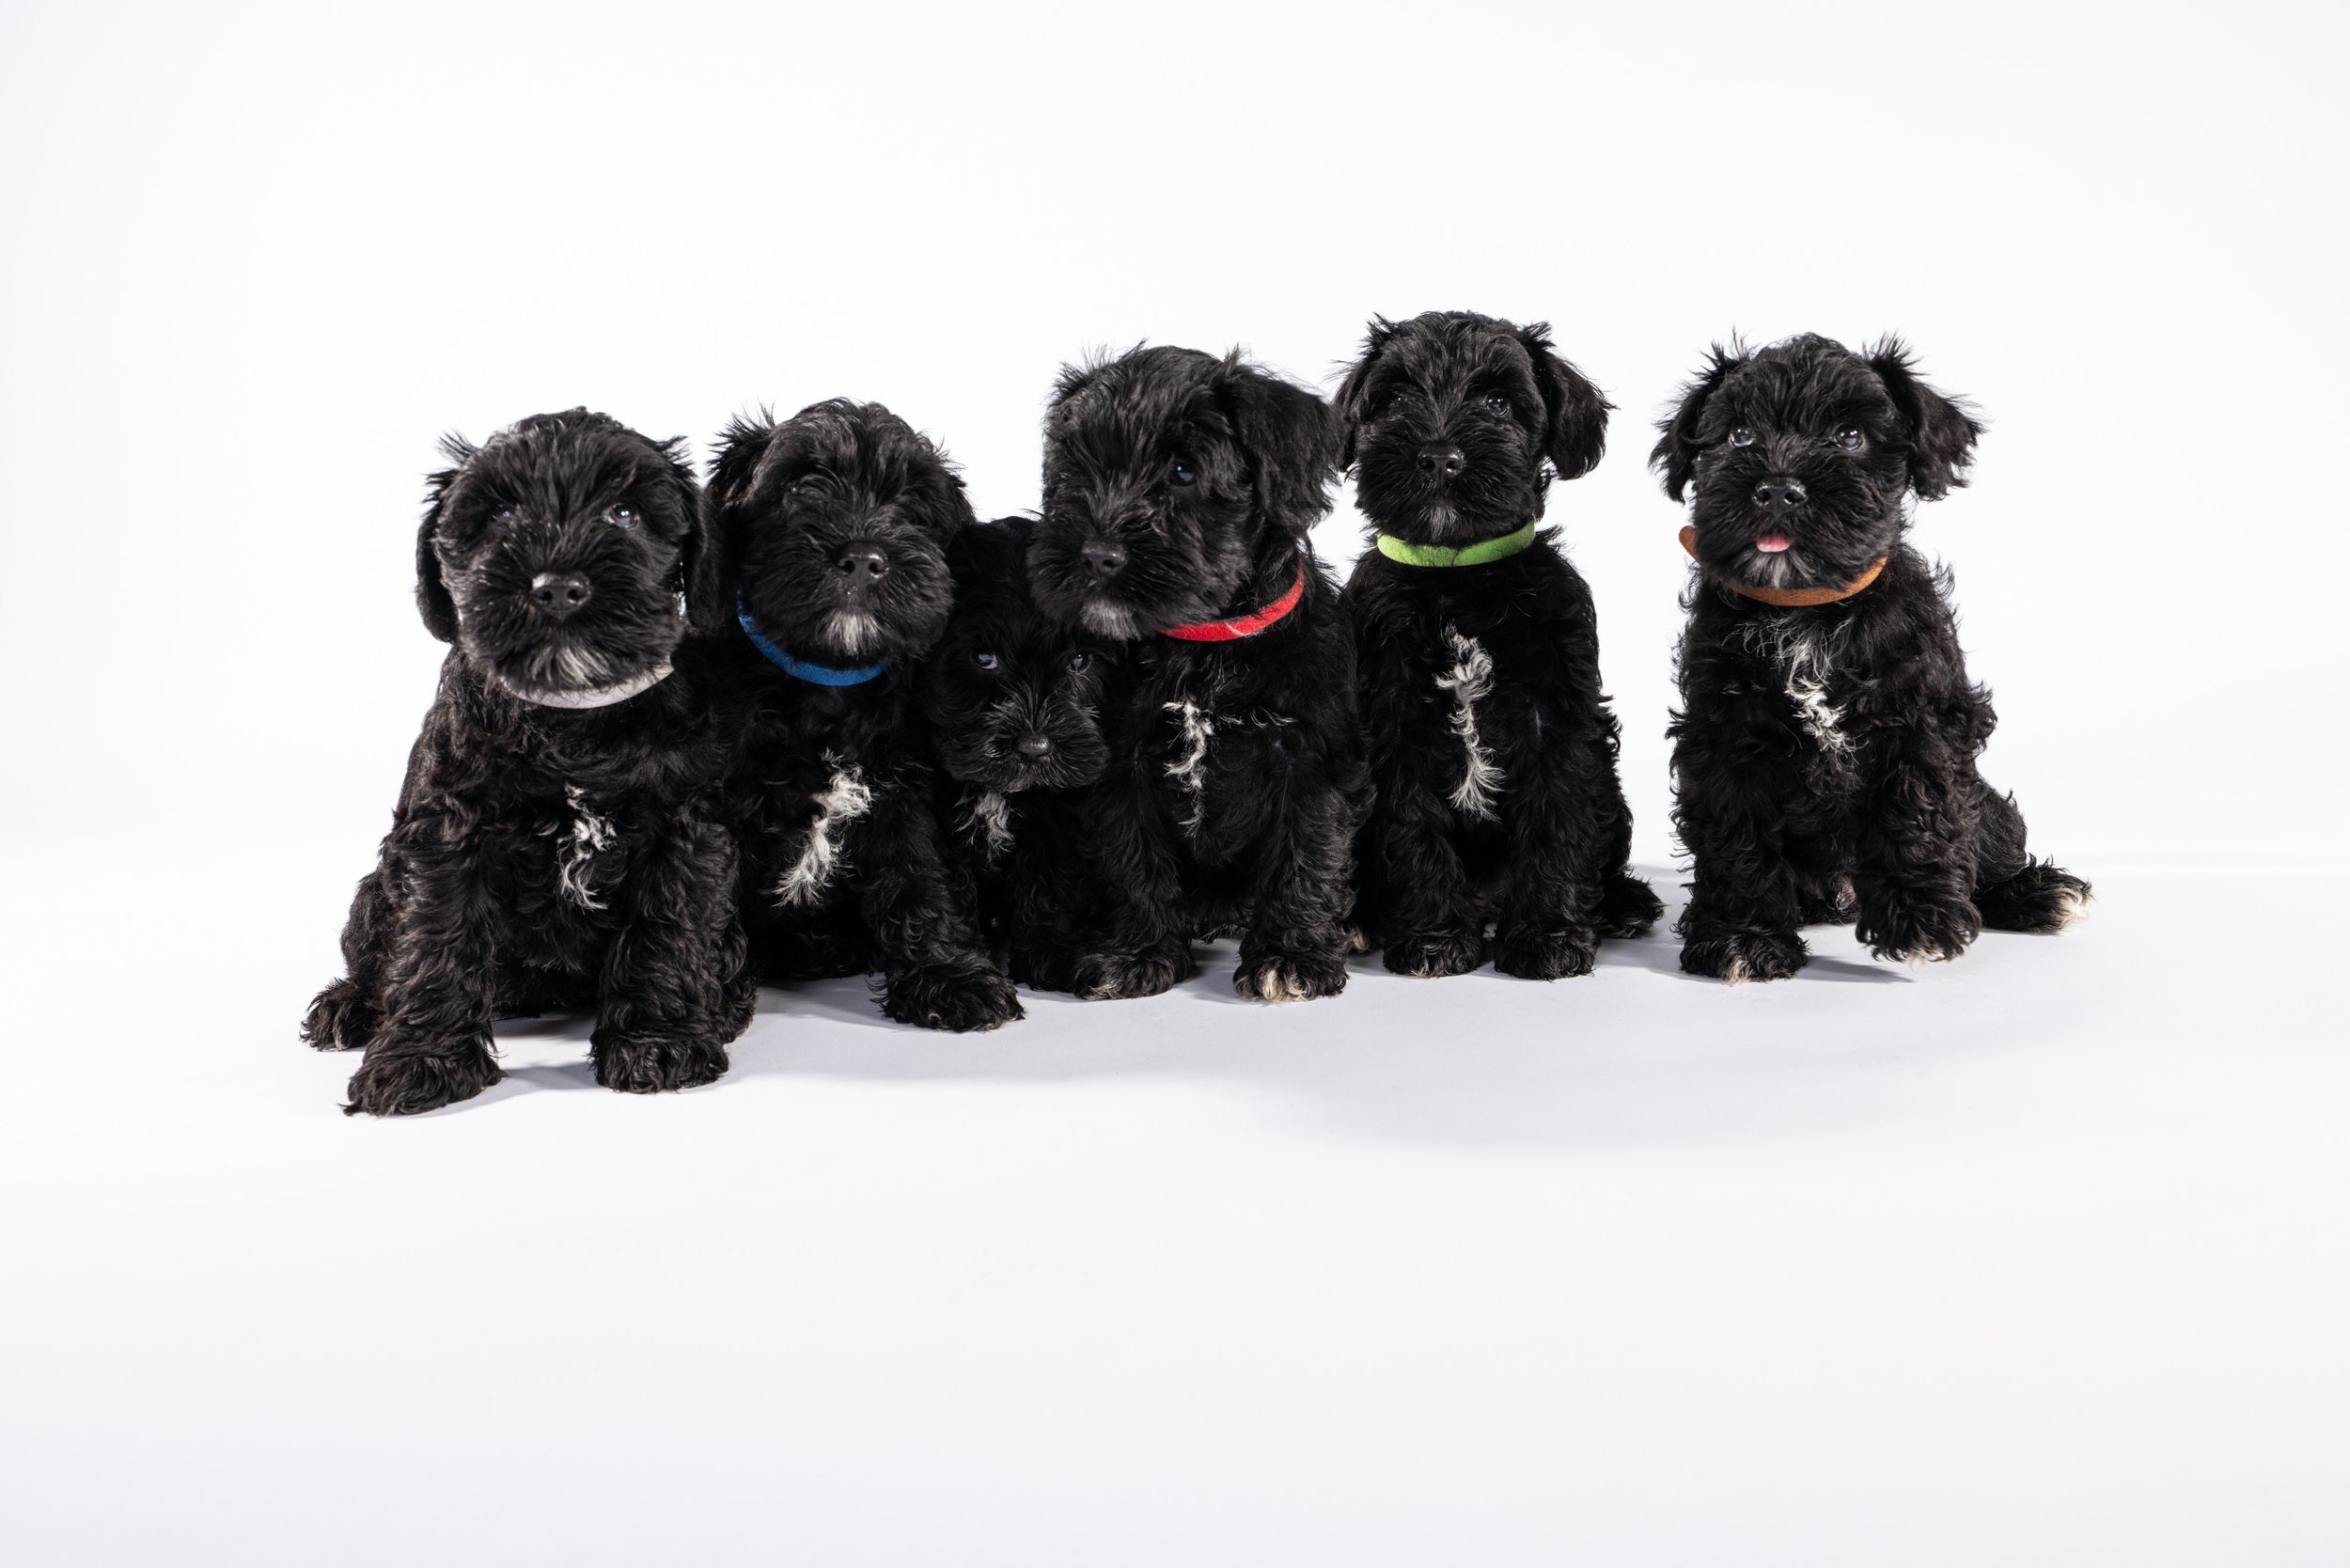 All 6 Schnauzer puppies together